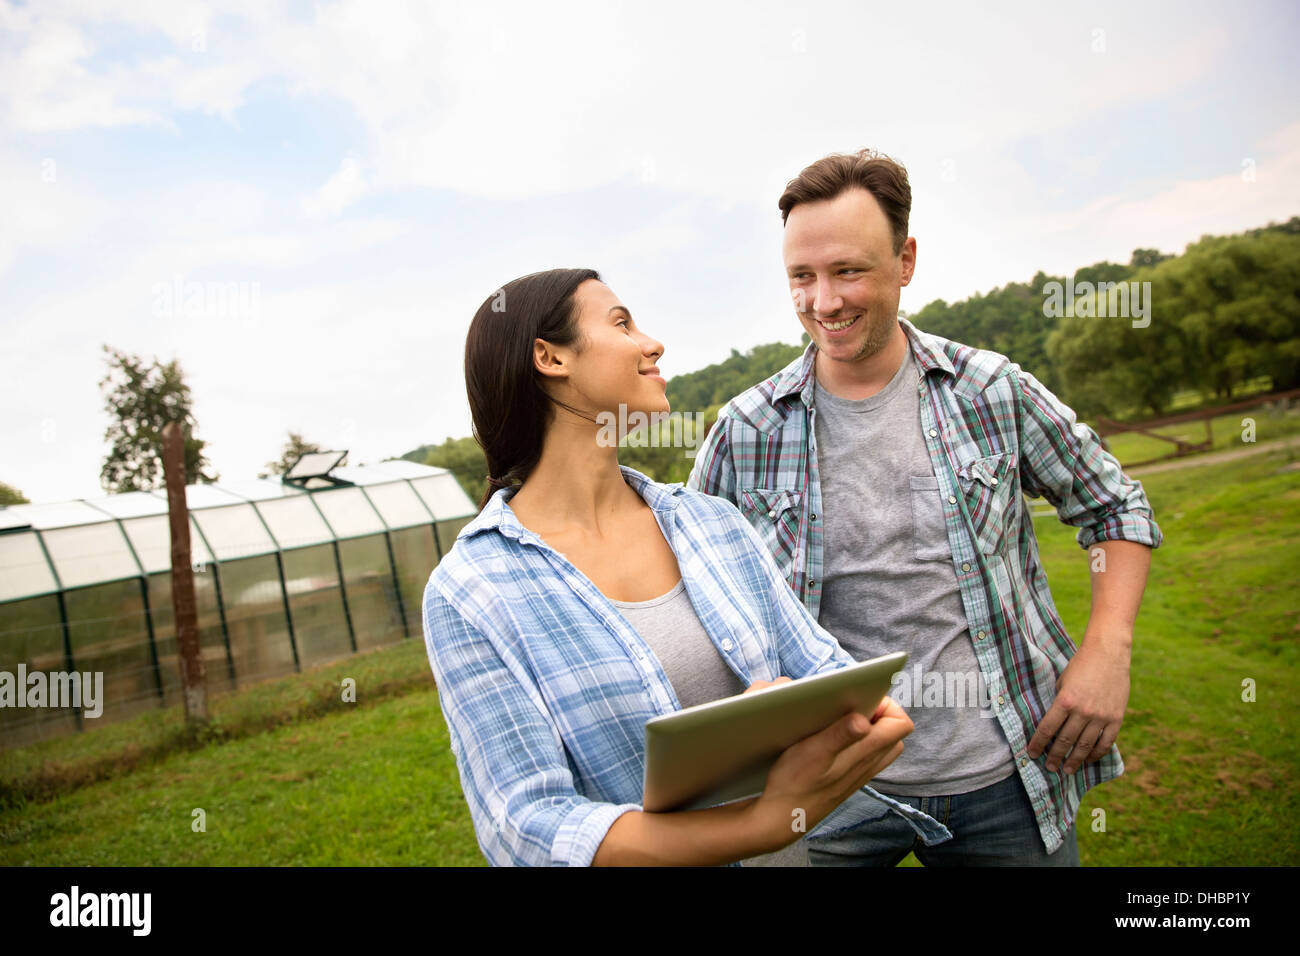 An organic farm in the Catskills. Two people using a digital tablet outdoors. Stock Photo